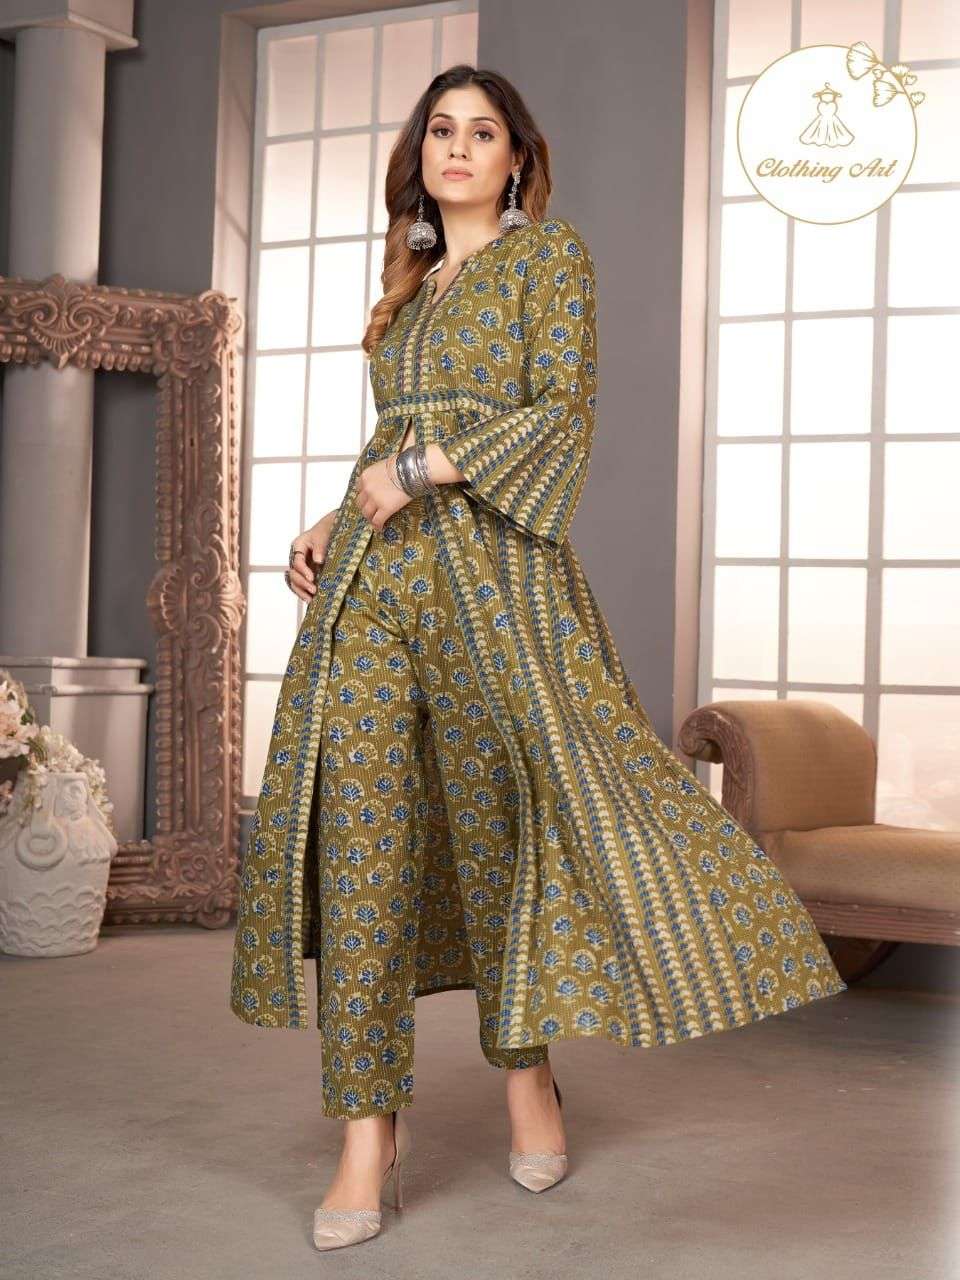 CLOTHING%20ART%20 %20ANARKALI%20 %20PURE%2060 60%20COTTON%20PRINTED%20CENTER%20CUT%20KURTI%20WITH%20DESIGNER%20SLEEVES%20WITH%20%20PURE%2060 60%20COTTON%20PRINTED%20PANT%20 %201004 3 2022 12 17 14 35 58